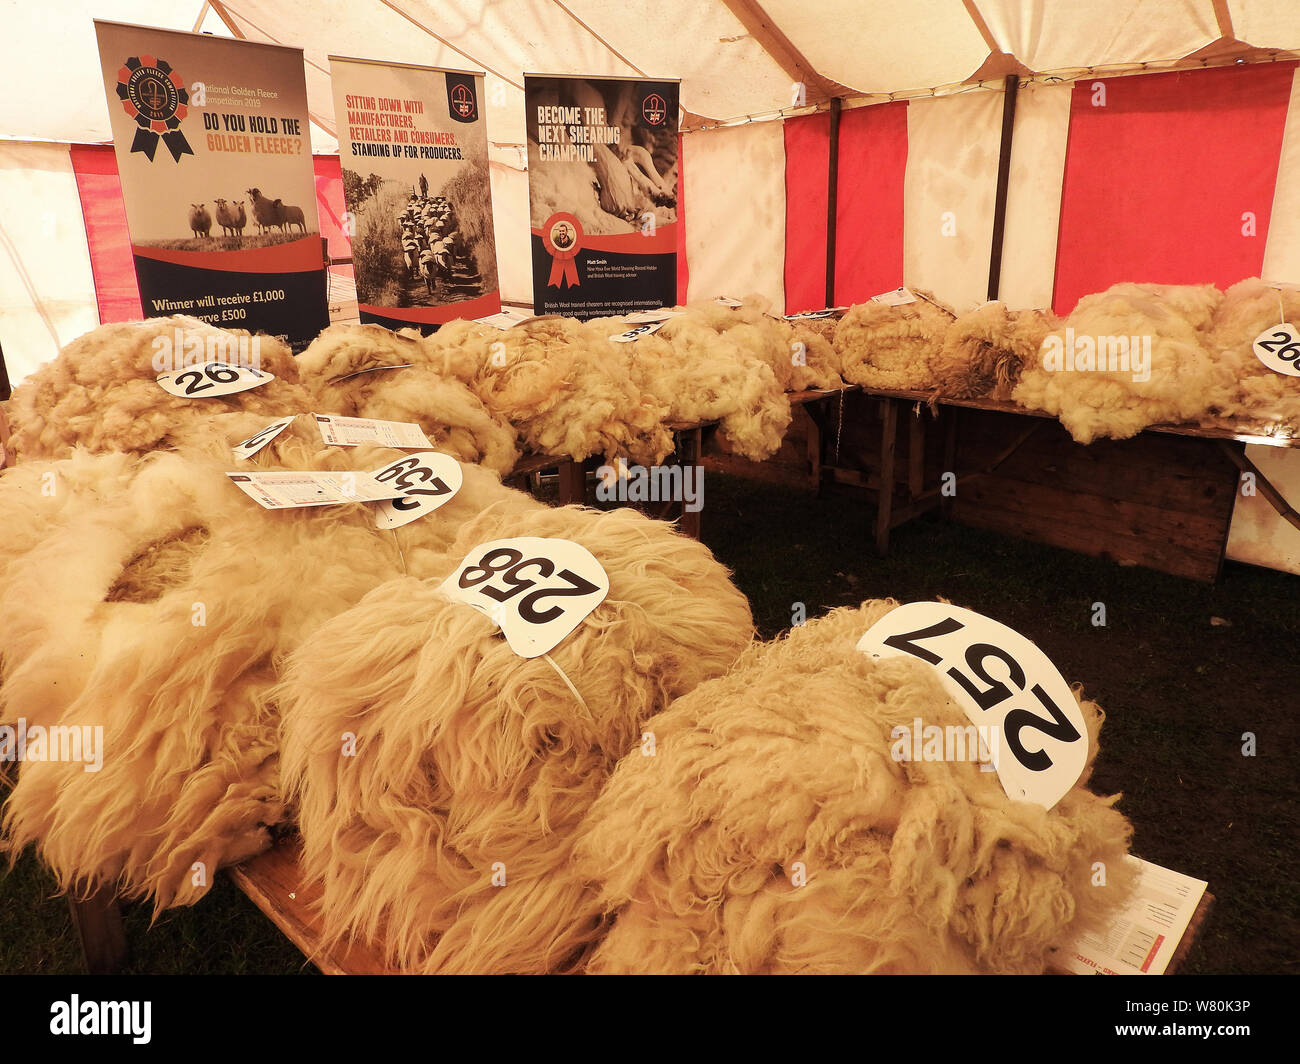 Wigtown horticultural and poultry show 2019 - Scottish wool fleece exhibits Stock Photo